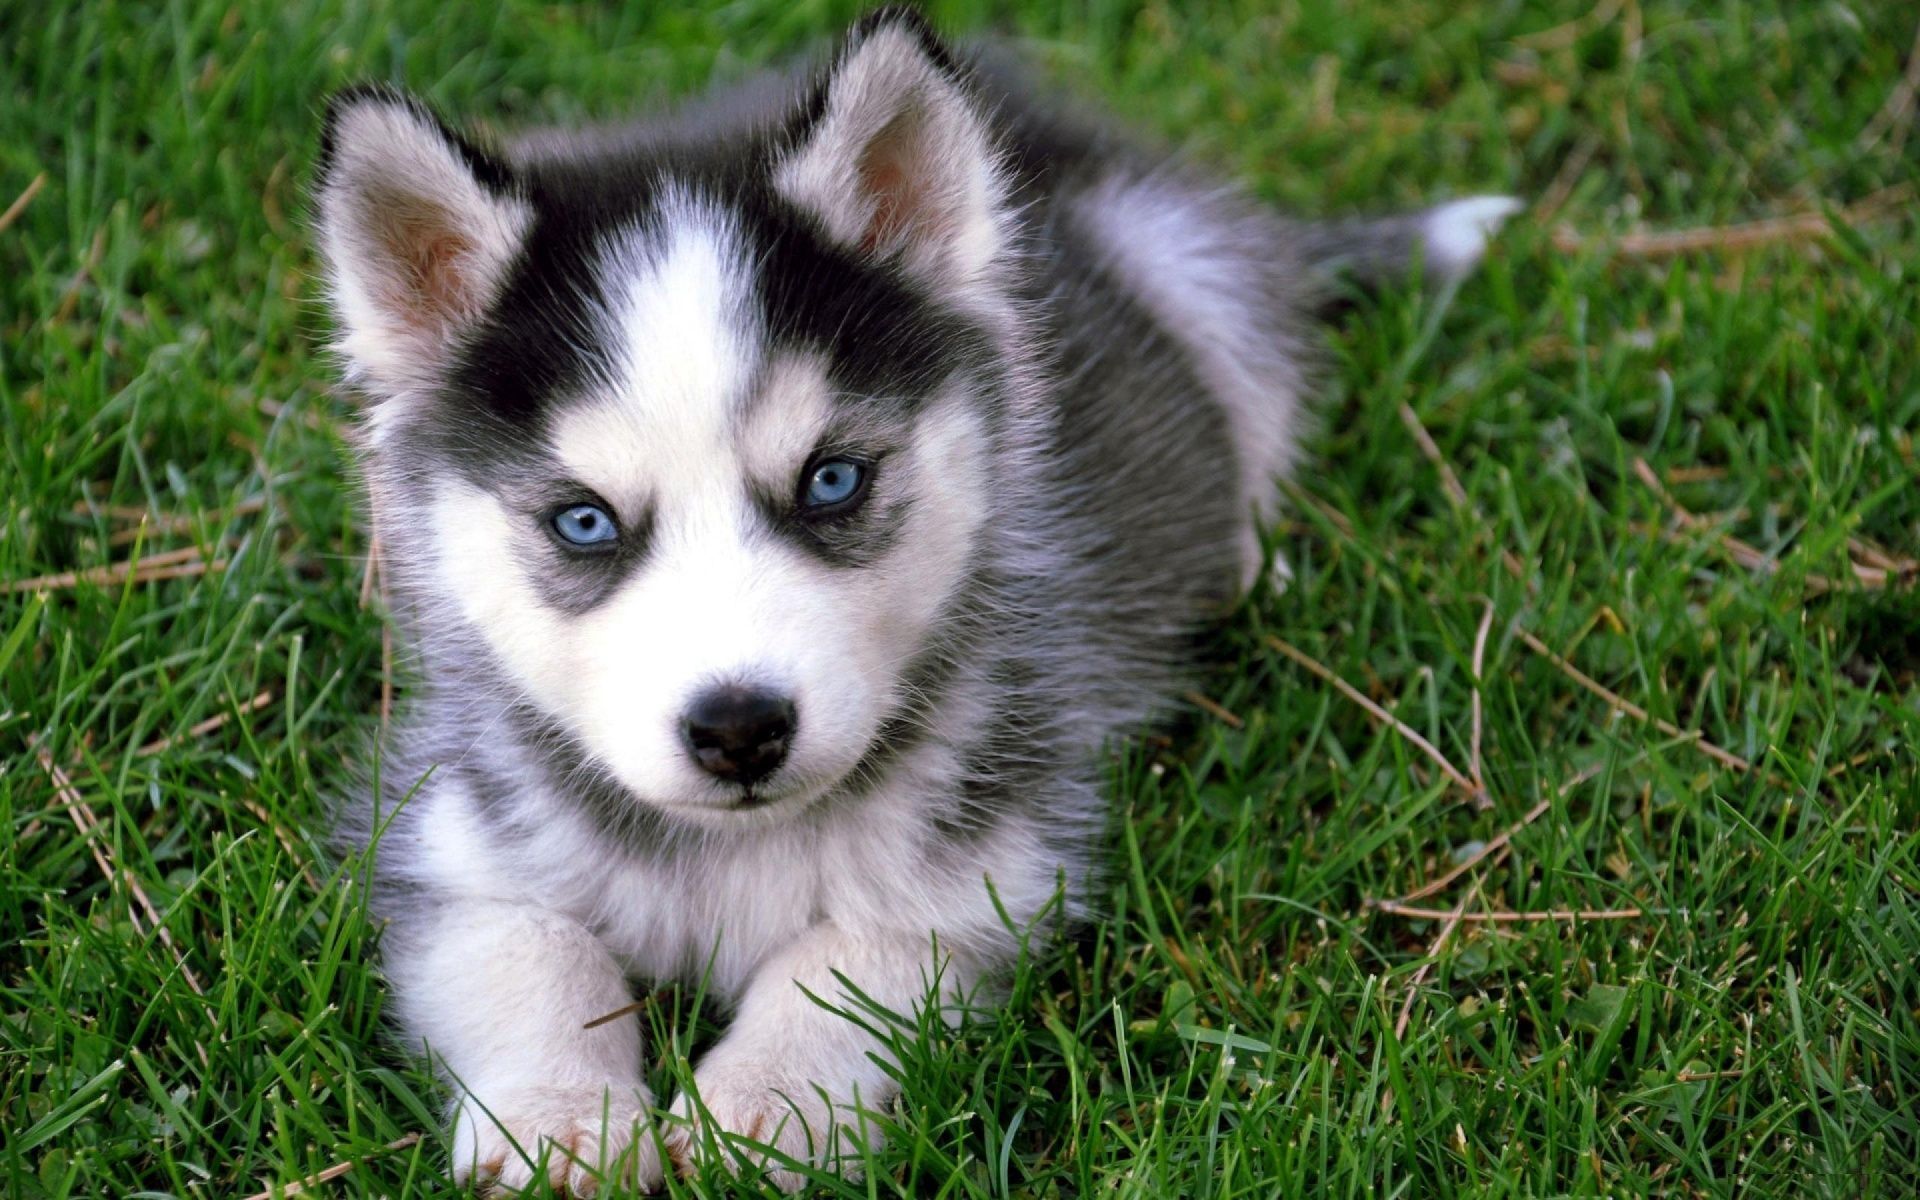 Cute Dog Wallpaper | Cute Dog Image | Cool Wallpapers